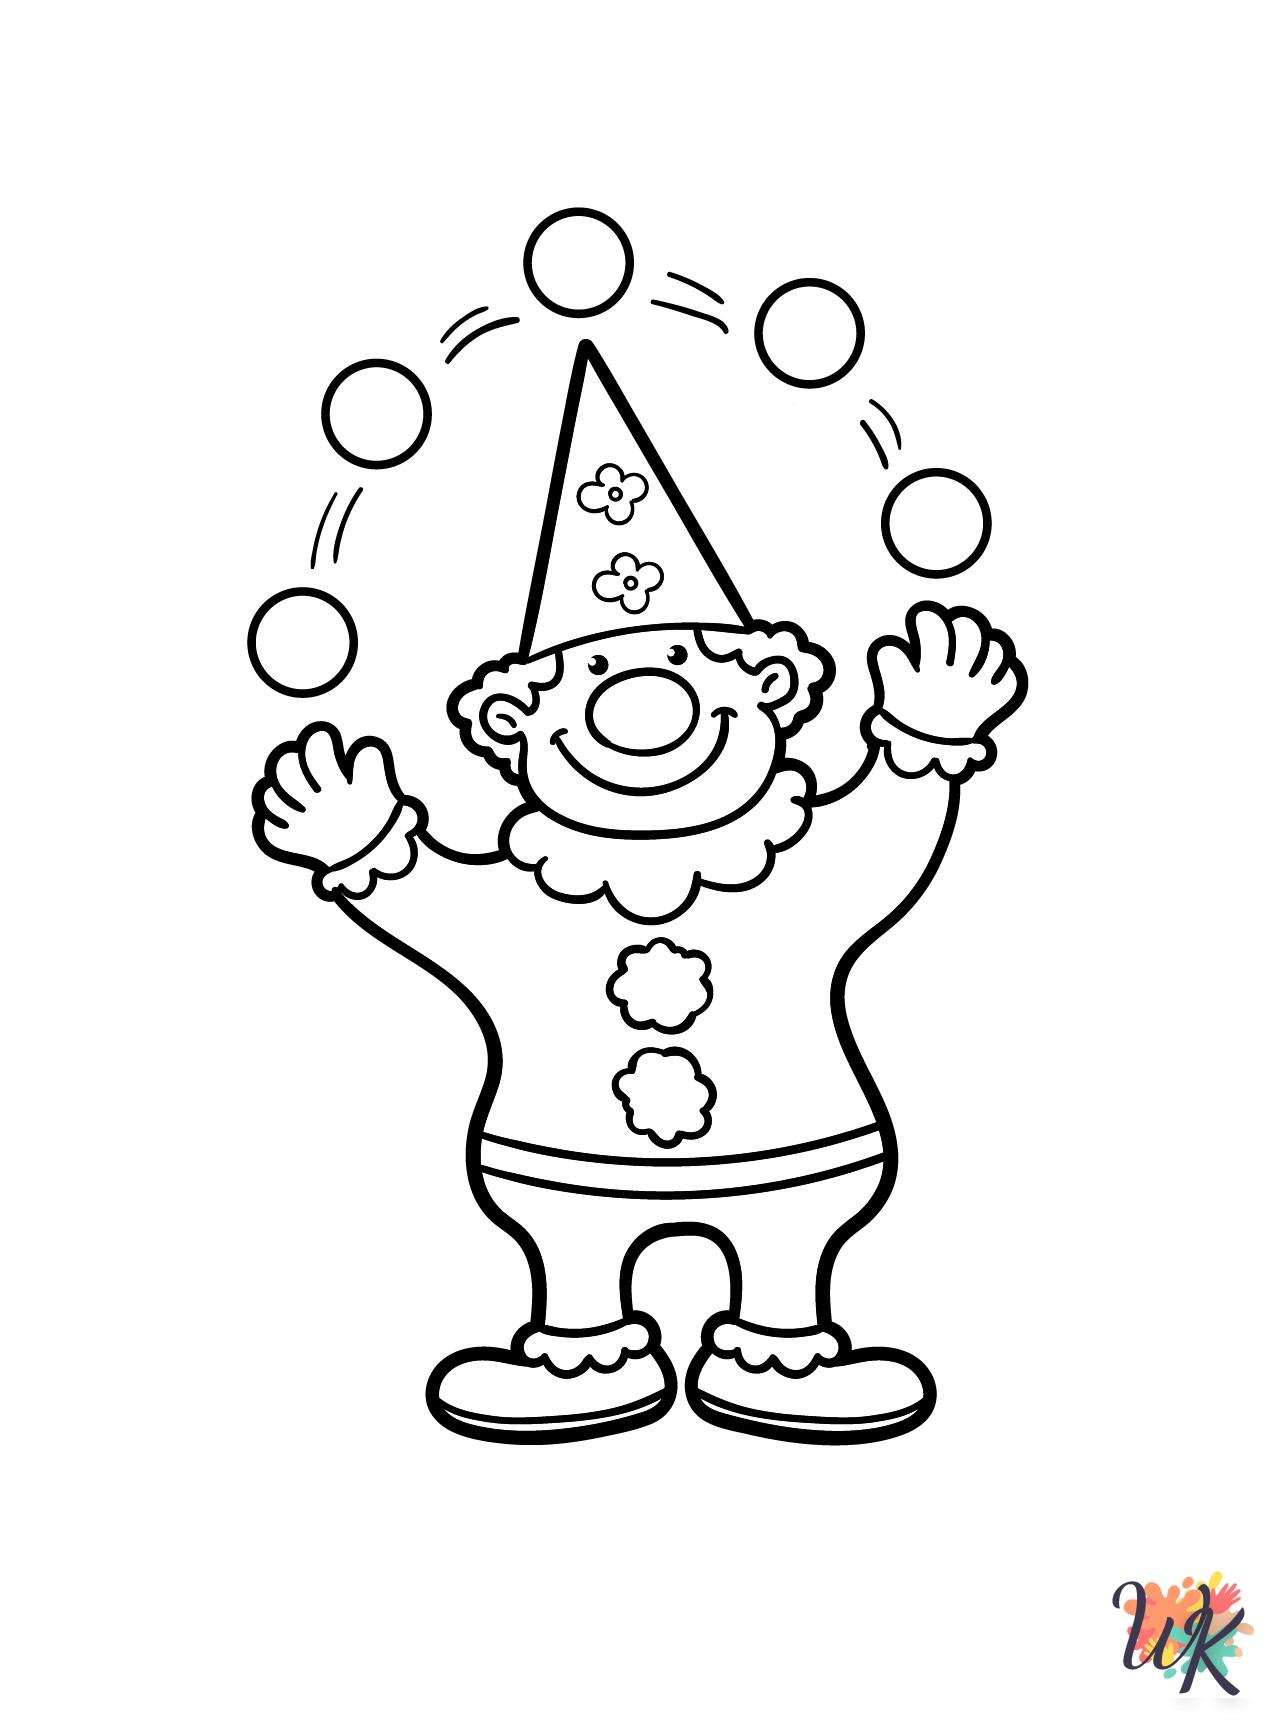 Circus free coloring pages